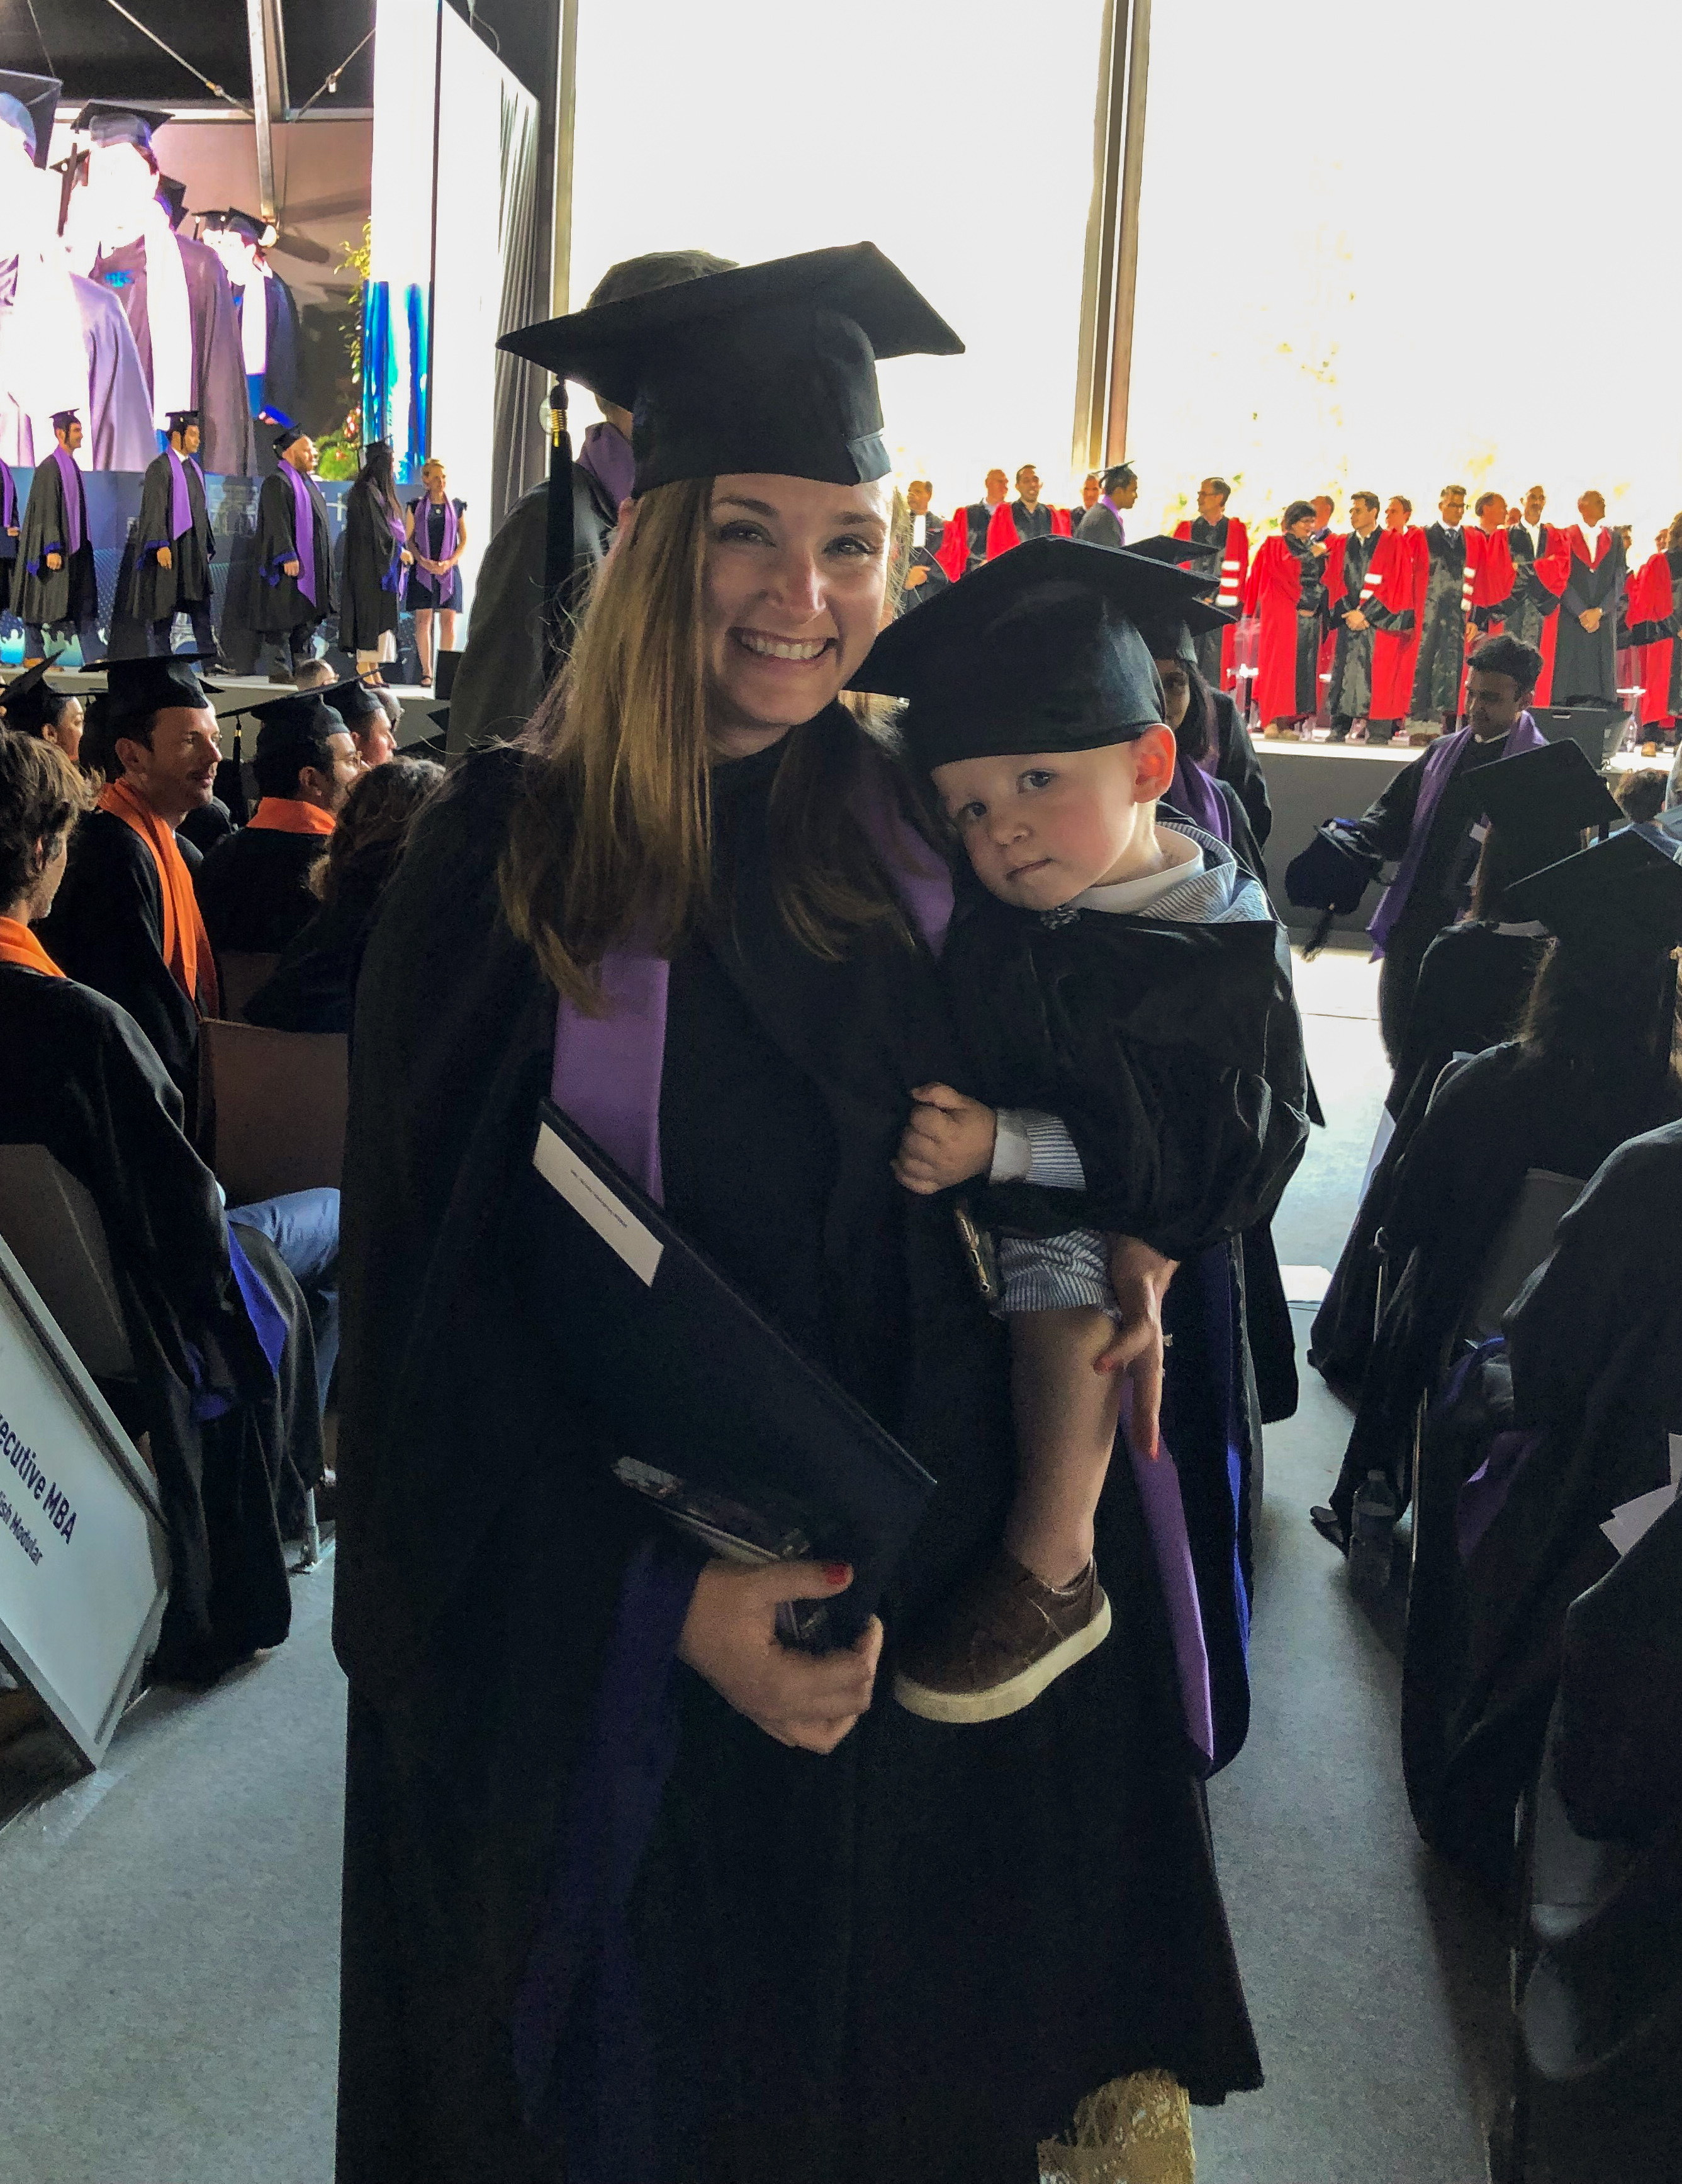 Nicole and her 6-month-old son, Rowan, on graduation day.